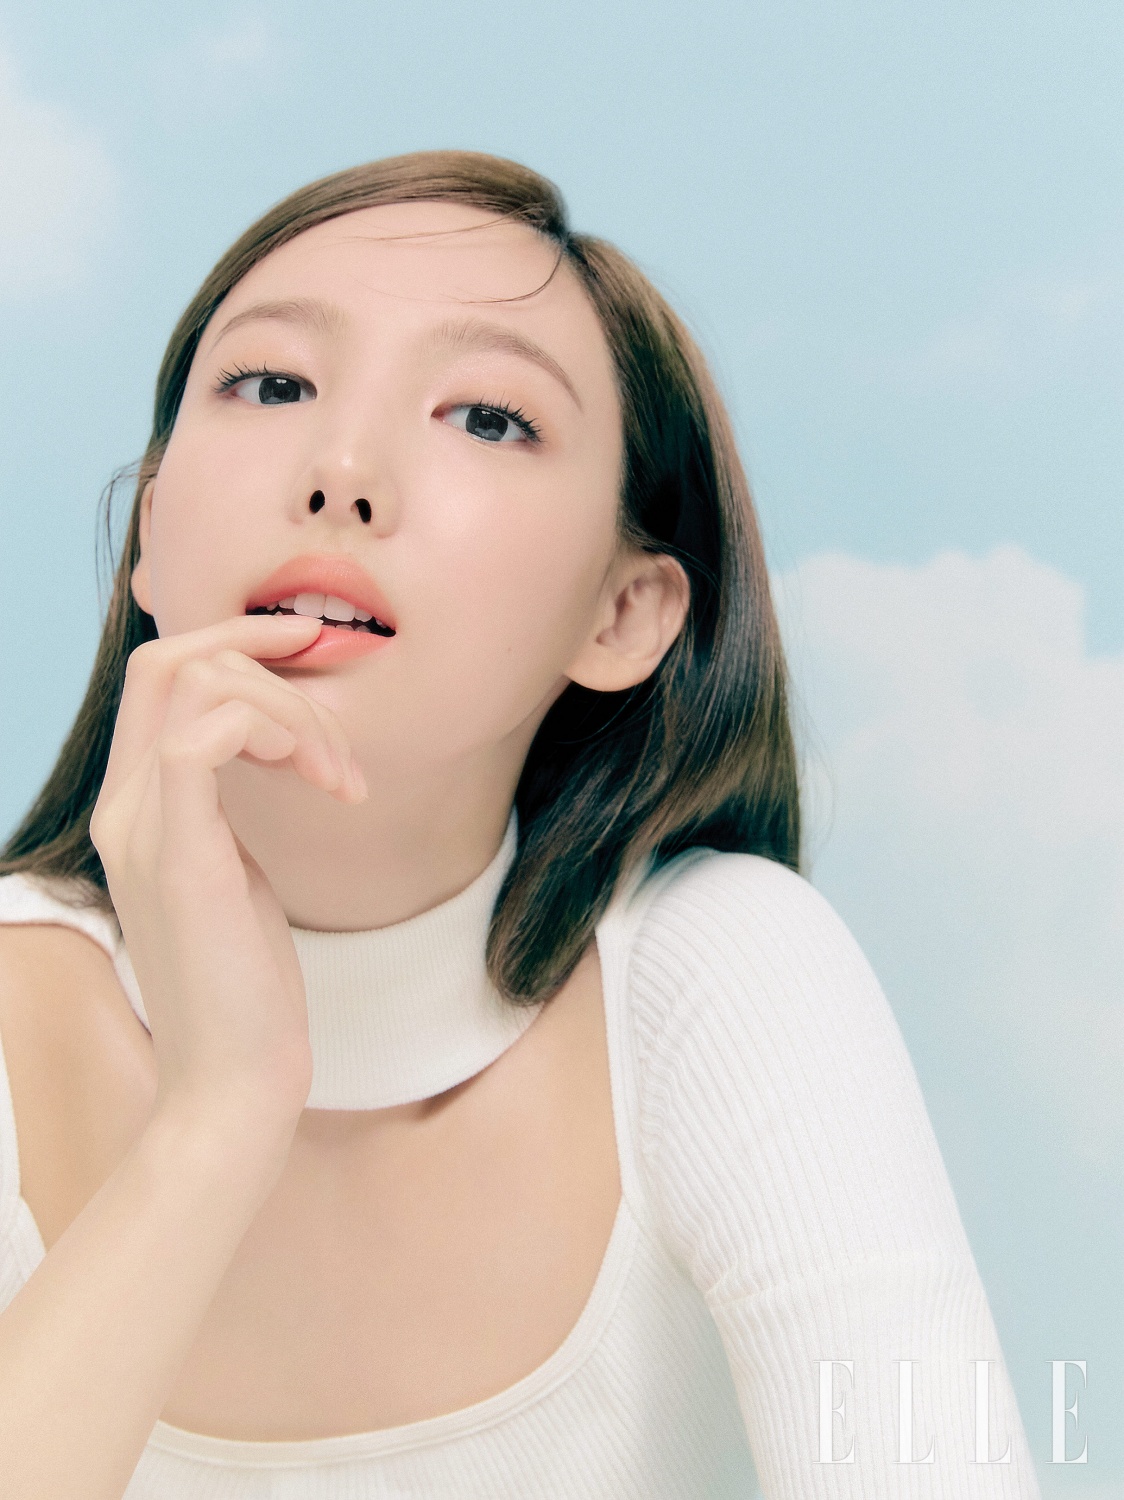 Twice Nayeon Earns Praise For Her Pure Visuals In Photos And Videos For Elle Korea Kpopstarz